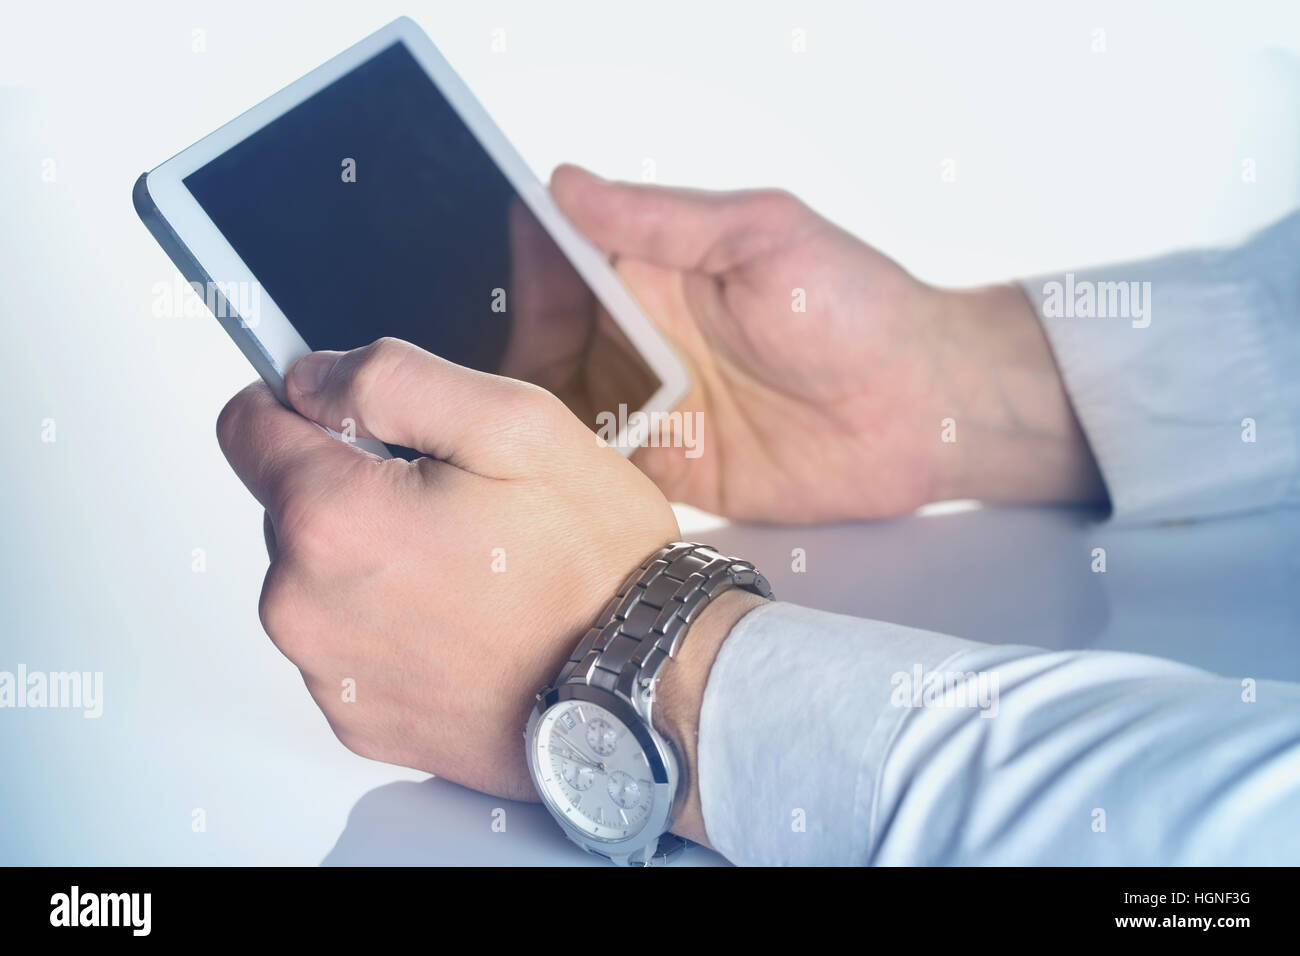 Tablet computer in male hands stained in blue. The original size of the tablet PC is changed. Stock Photo